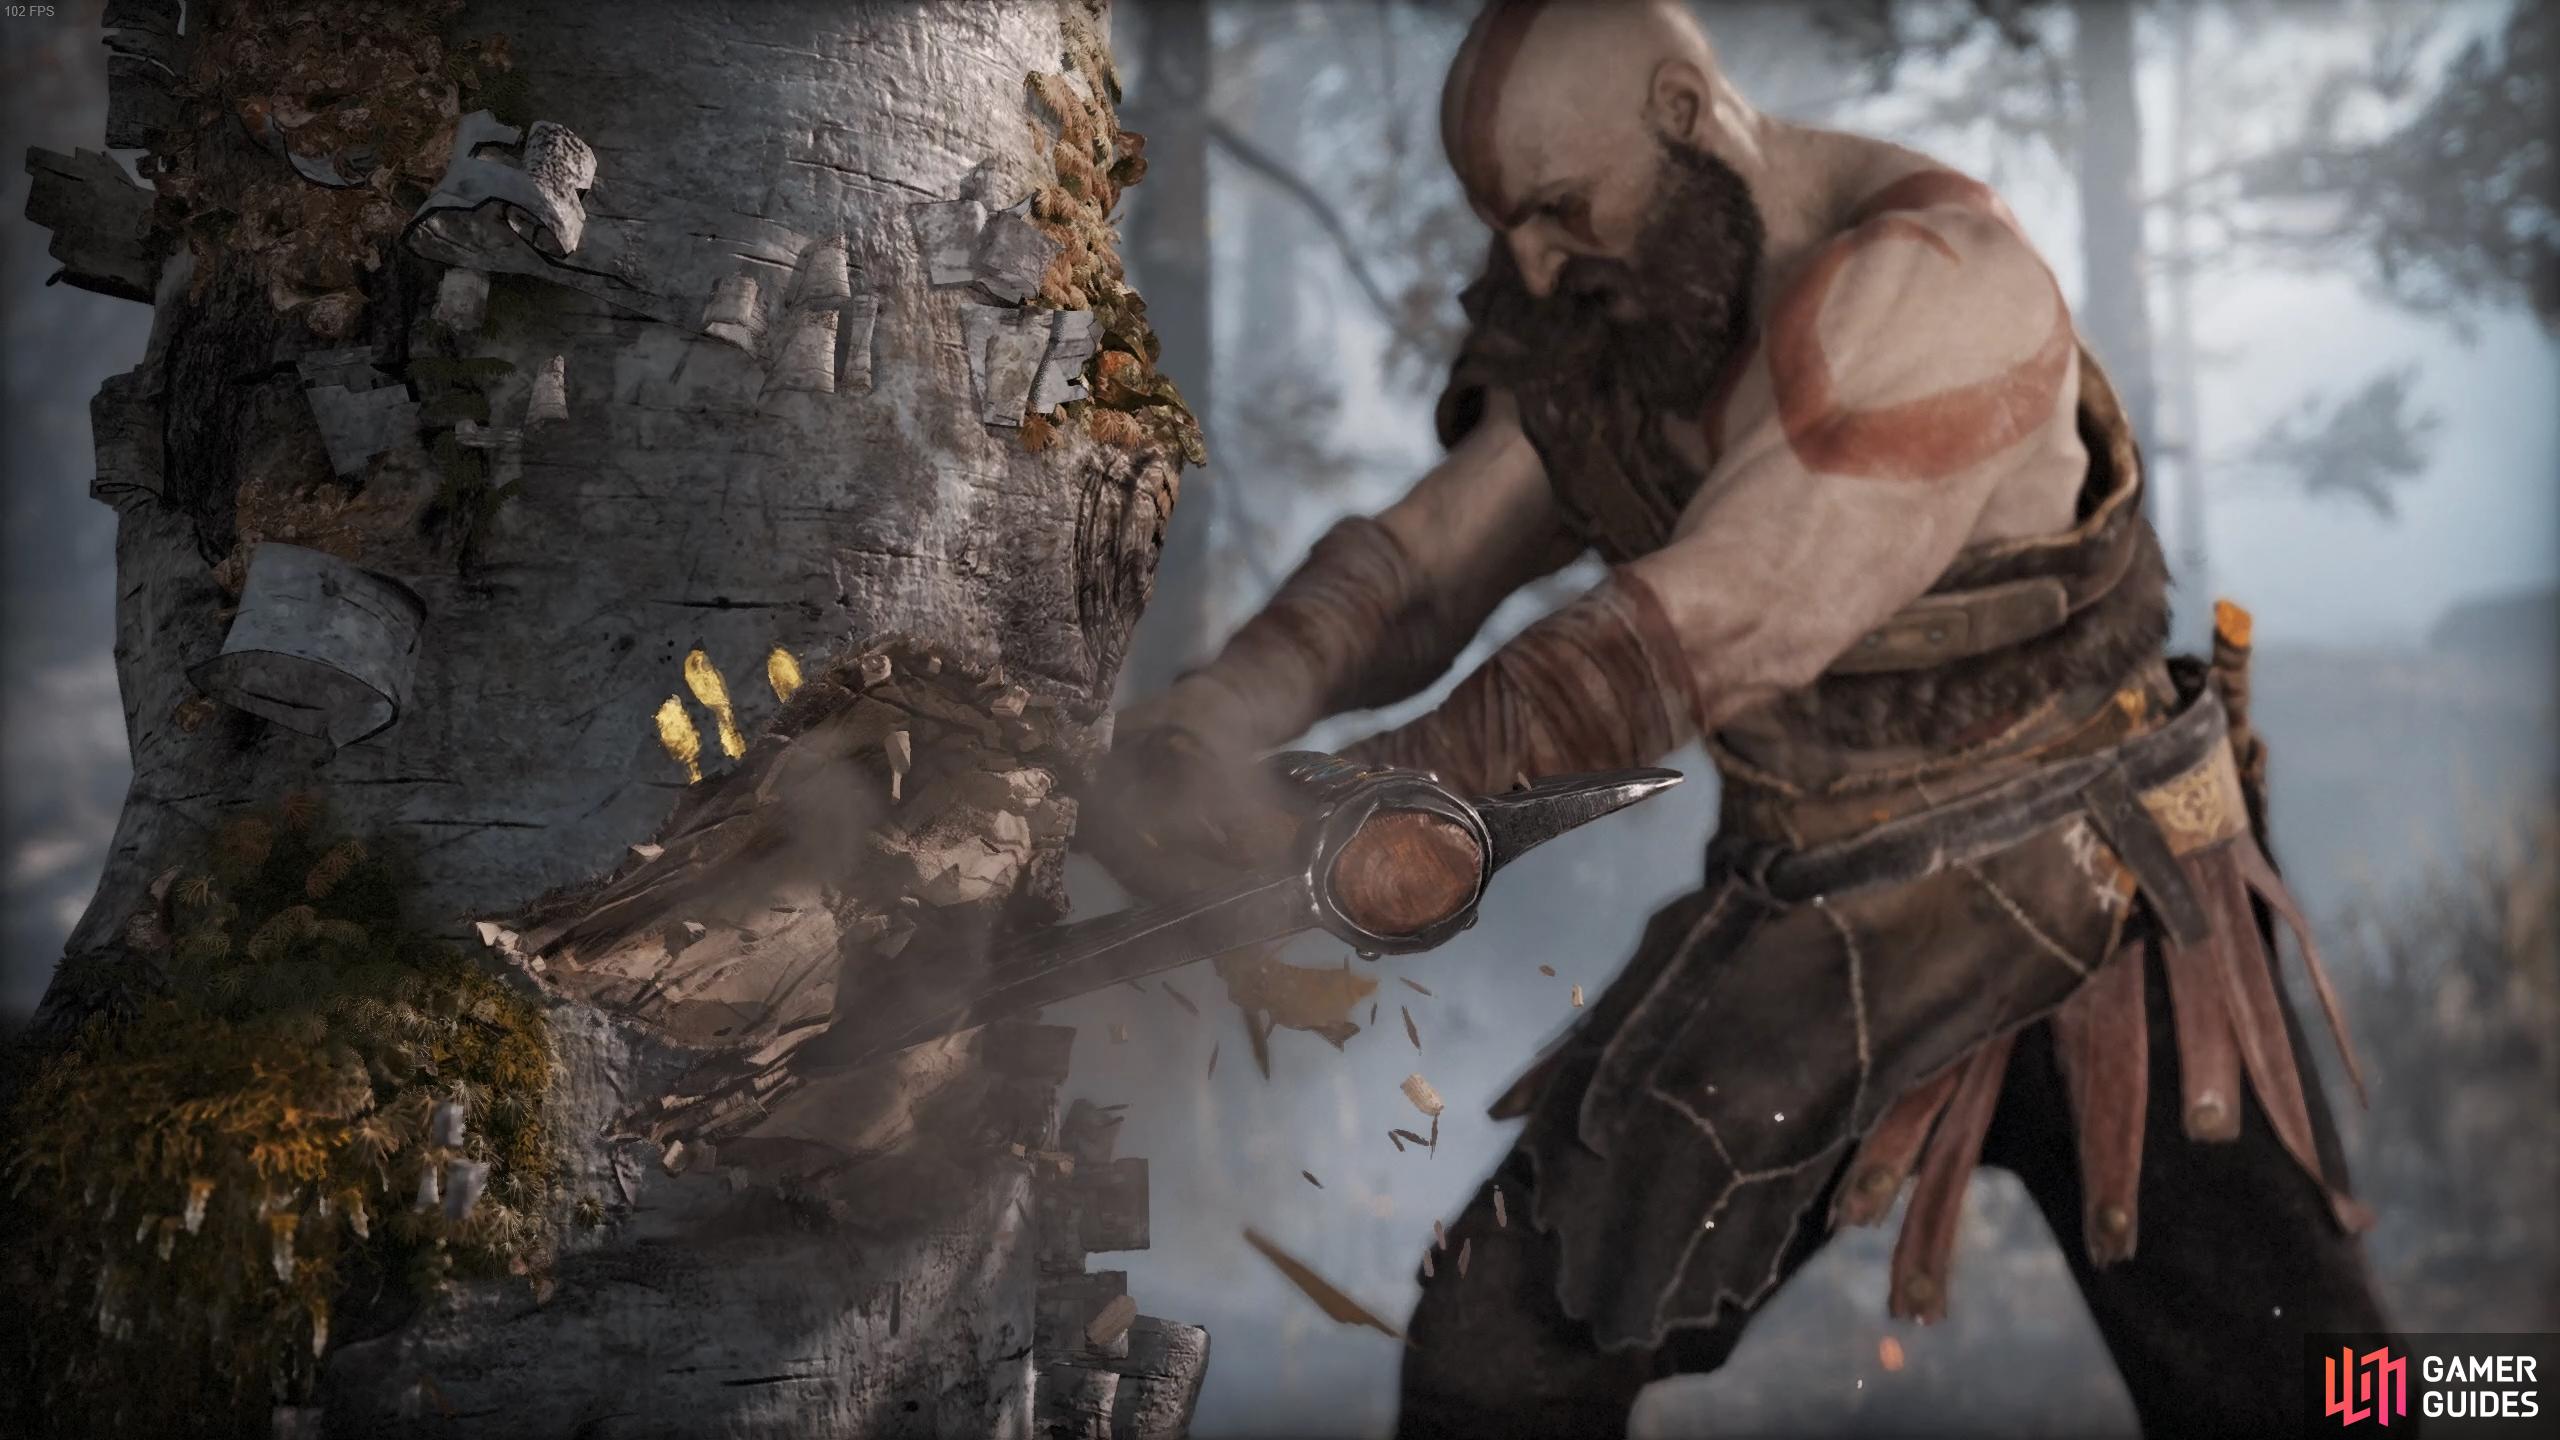 Although a cinematic, you'll still need to help Kratos fell the tree with the R1 or Mouse 1 buttons.